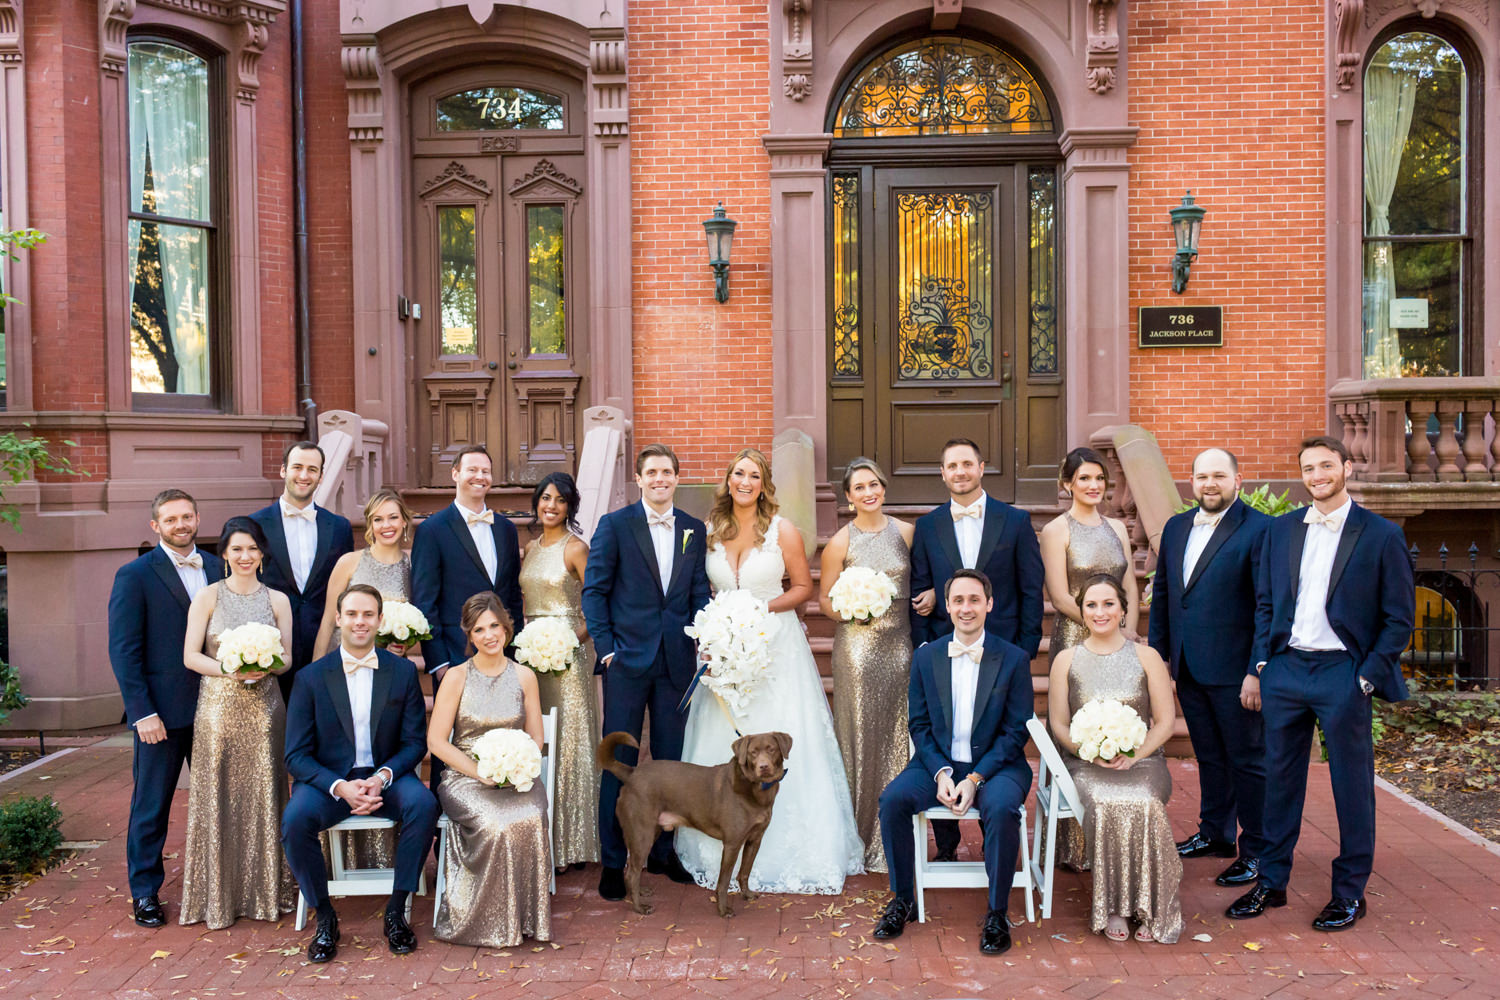 This was a Decatur House wedding, Decatur house is the closest venue to the White House in Washington DC, this bridal party, wedding party photo was taken on the same block as the venue, overlooking Lafayette Park, The bridal party is sitting and standing in a modern, editorial look, they even have their dog in the photo, dogs at weddings, pup ring bearer, Procopio Photography, best top Washington DC photographer, best top Maryland photographer, best top Virginia photographer, best top DMV photographer, best top wedding photographer, best top commercial photographer, best top portrait photographer, best top boudoir photographer, modern fine art portraits, dramatic, unique, different, bold, editorial, photojournalism, award winning photographer, published photographer, memorable images, be different, stand out